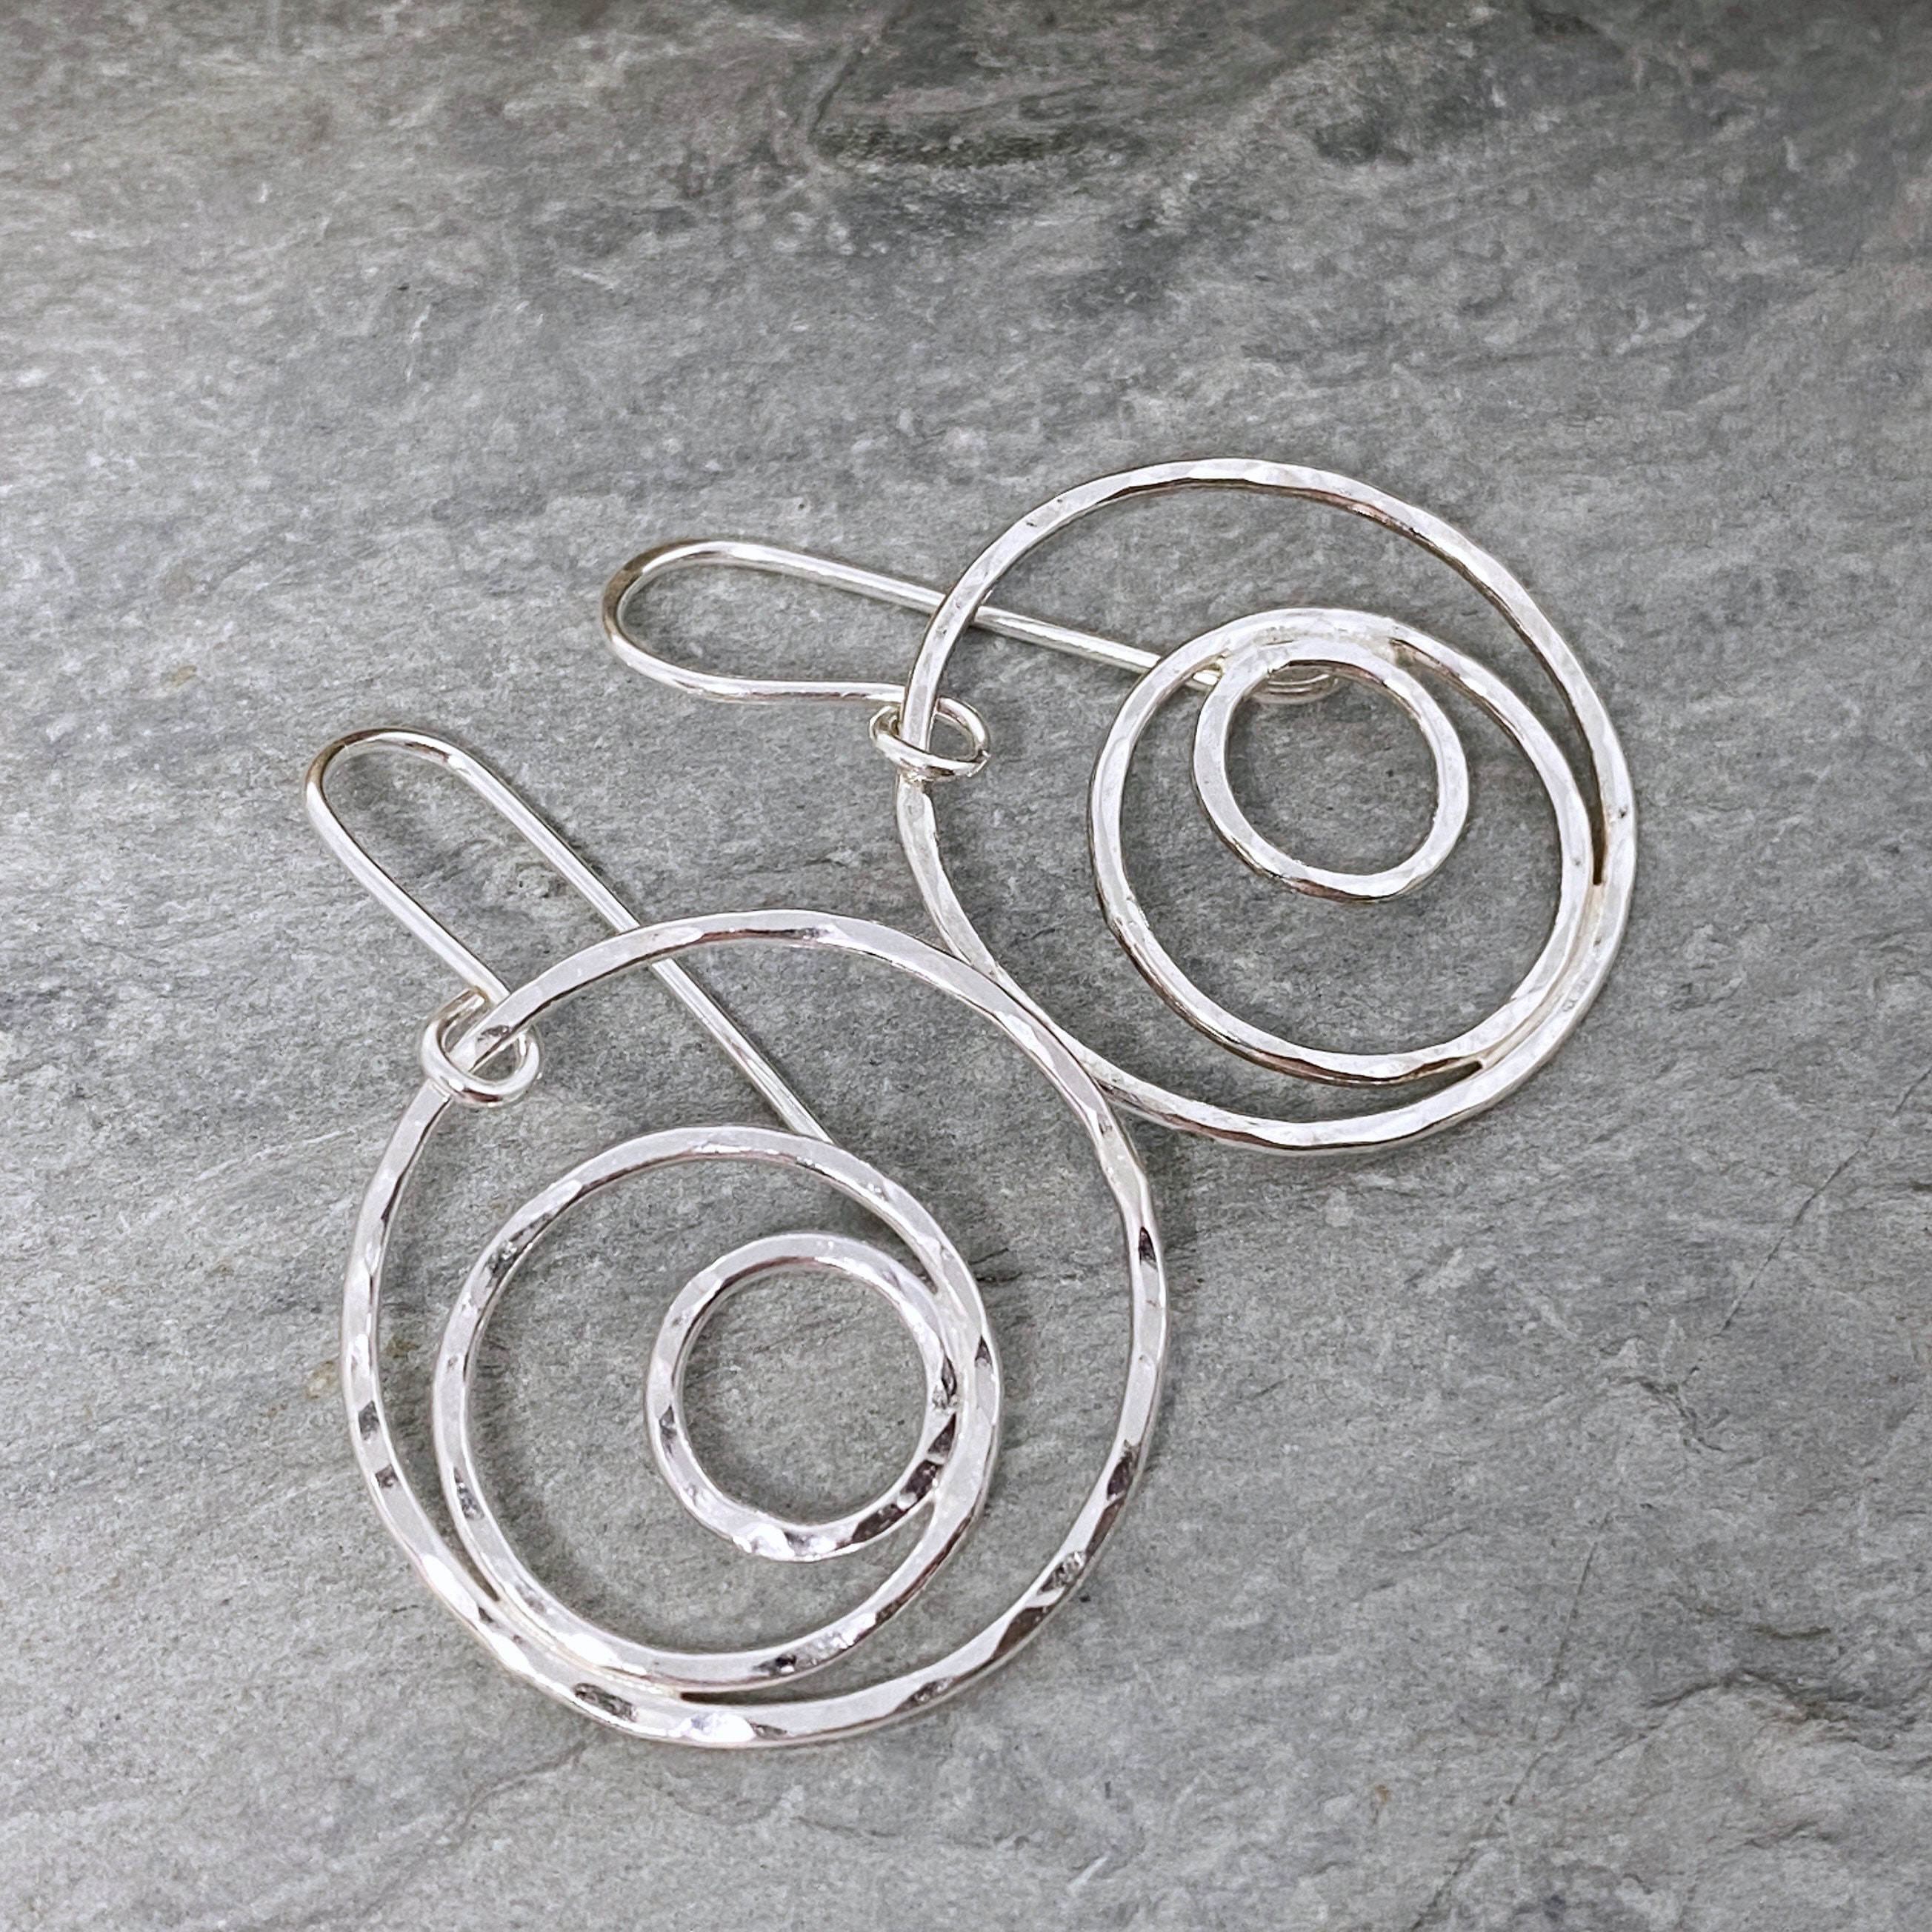 Handmade Hammered Silver Circles Dangly Earrings